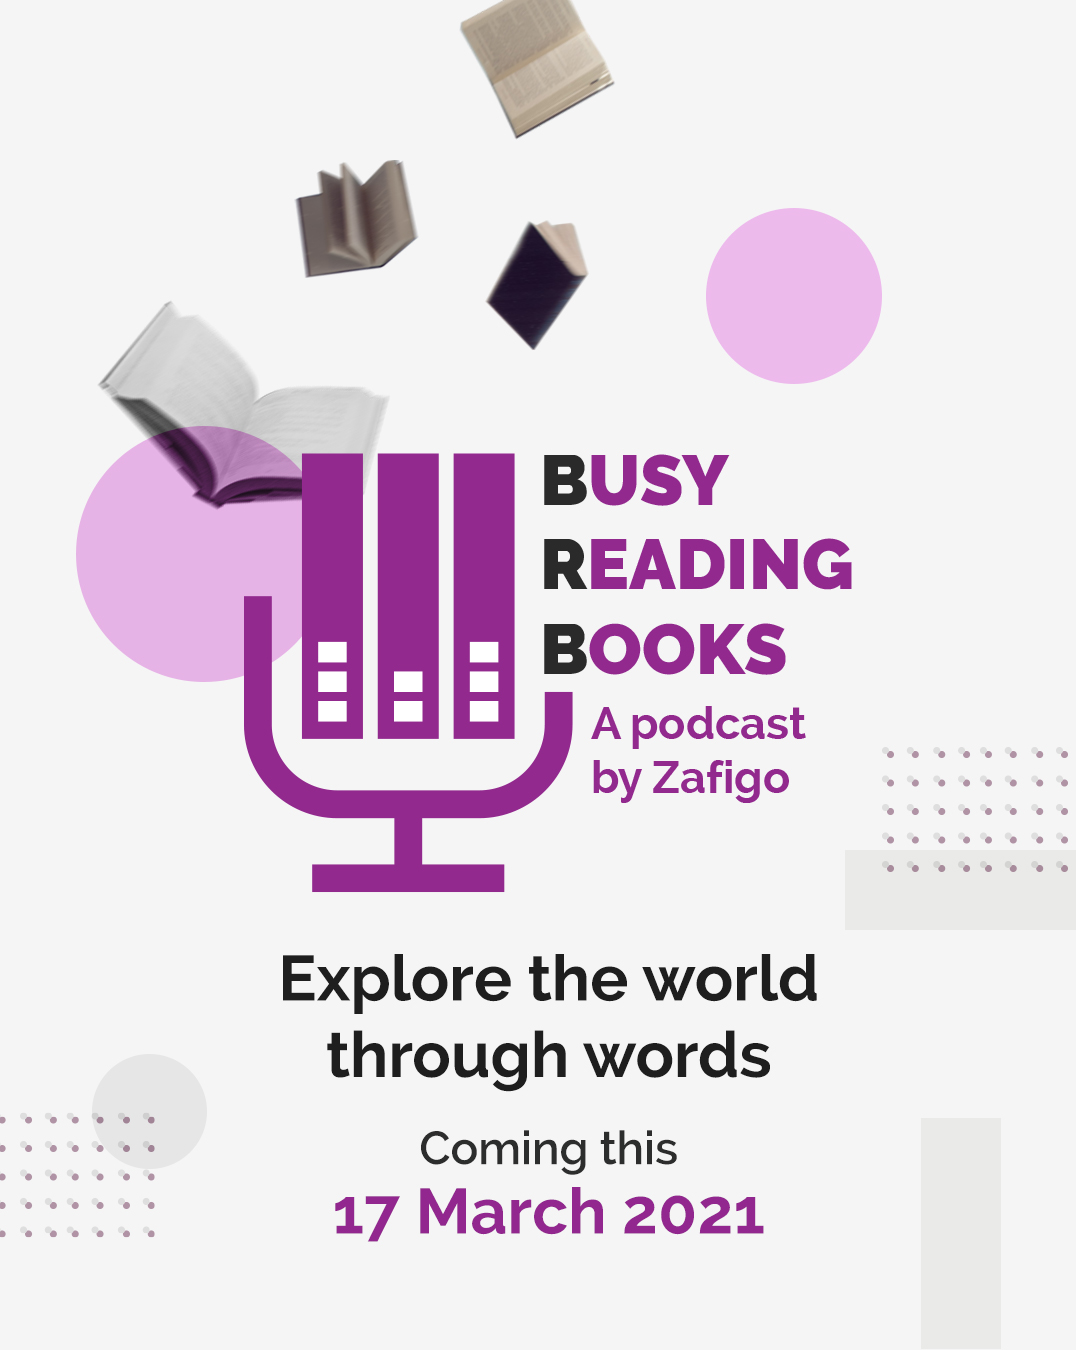 Time for some shelf-indulgence with our new book podcast – Busy Reading Books, a weekly series exploring the world through words, hosted by Marina Mahathir.